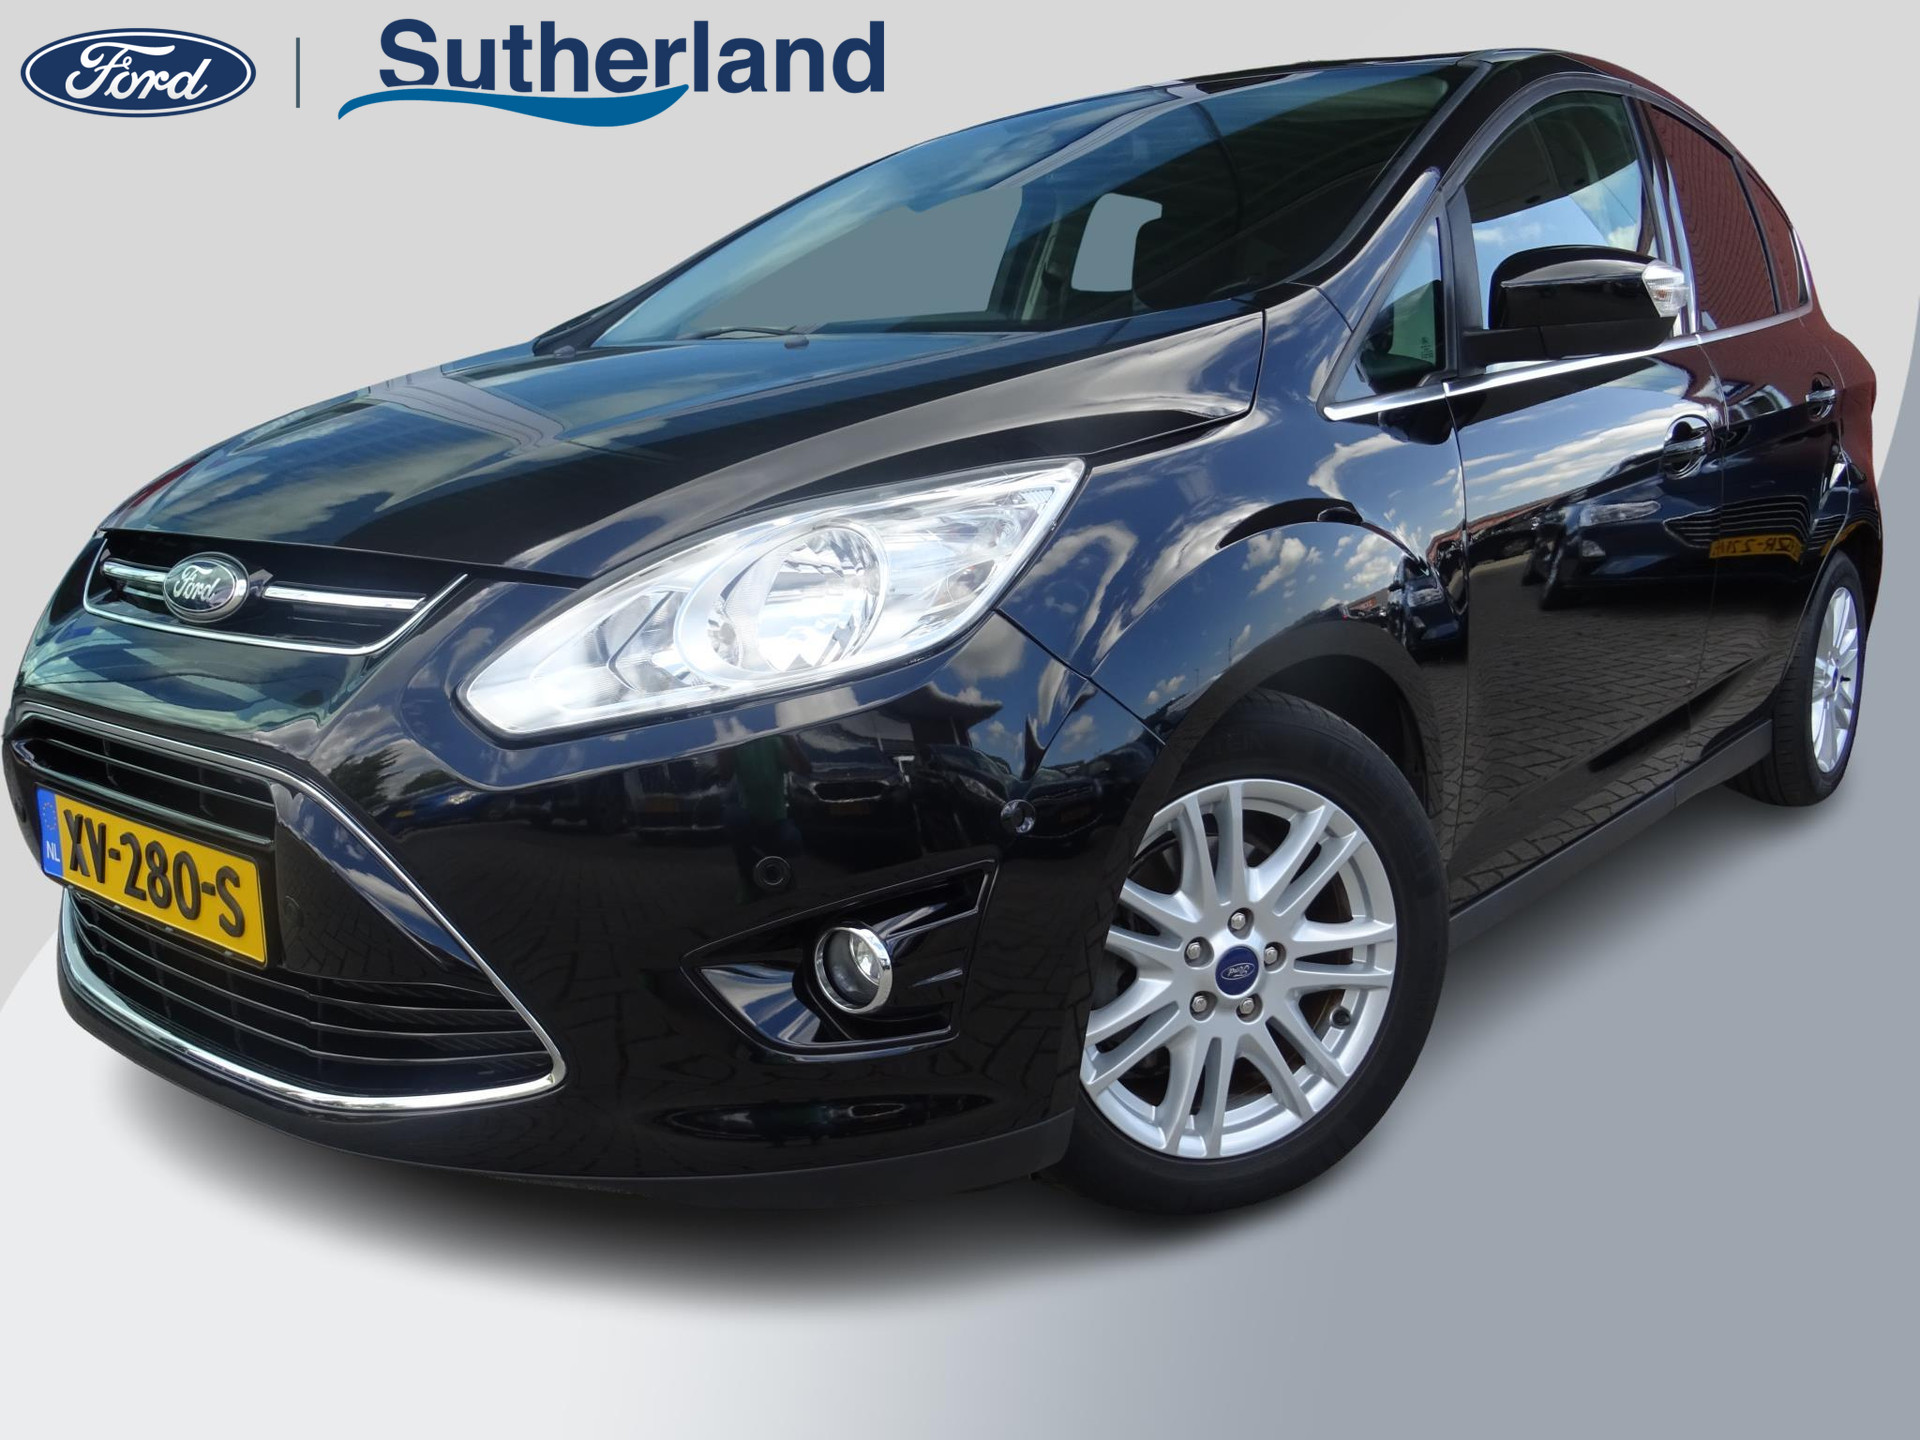 Ford C-Max 1.0 EcoBoost 125 PK Titanium | Trekhaak | Electrische Achterklep | PDC V + A | Climate Control | Cruise Control | Sony Audio | Voorruitverwarming | Privacy Glass